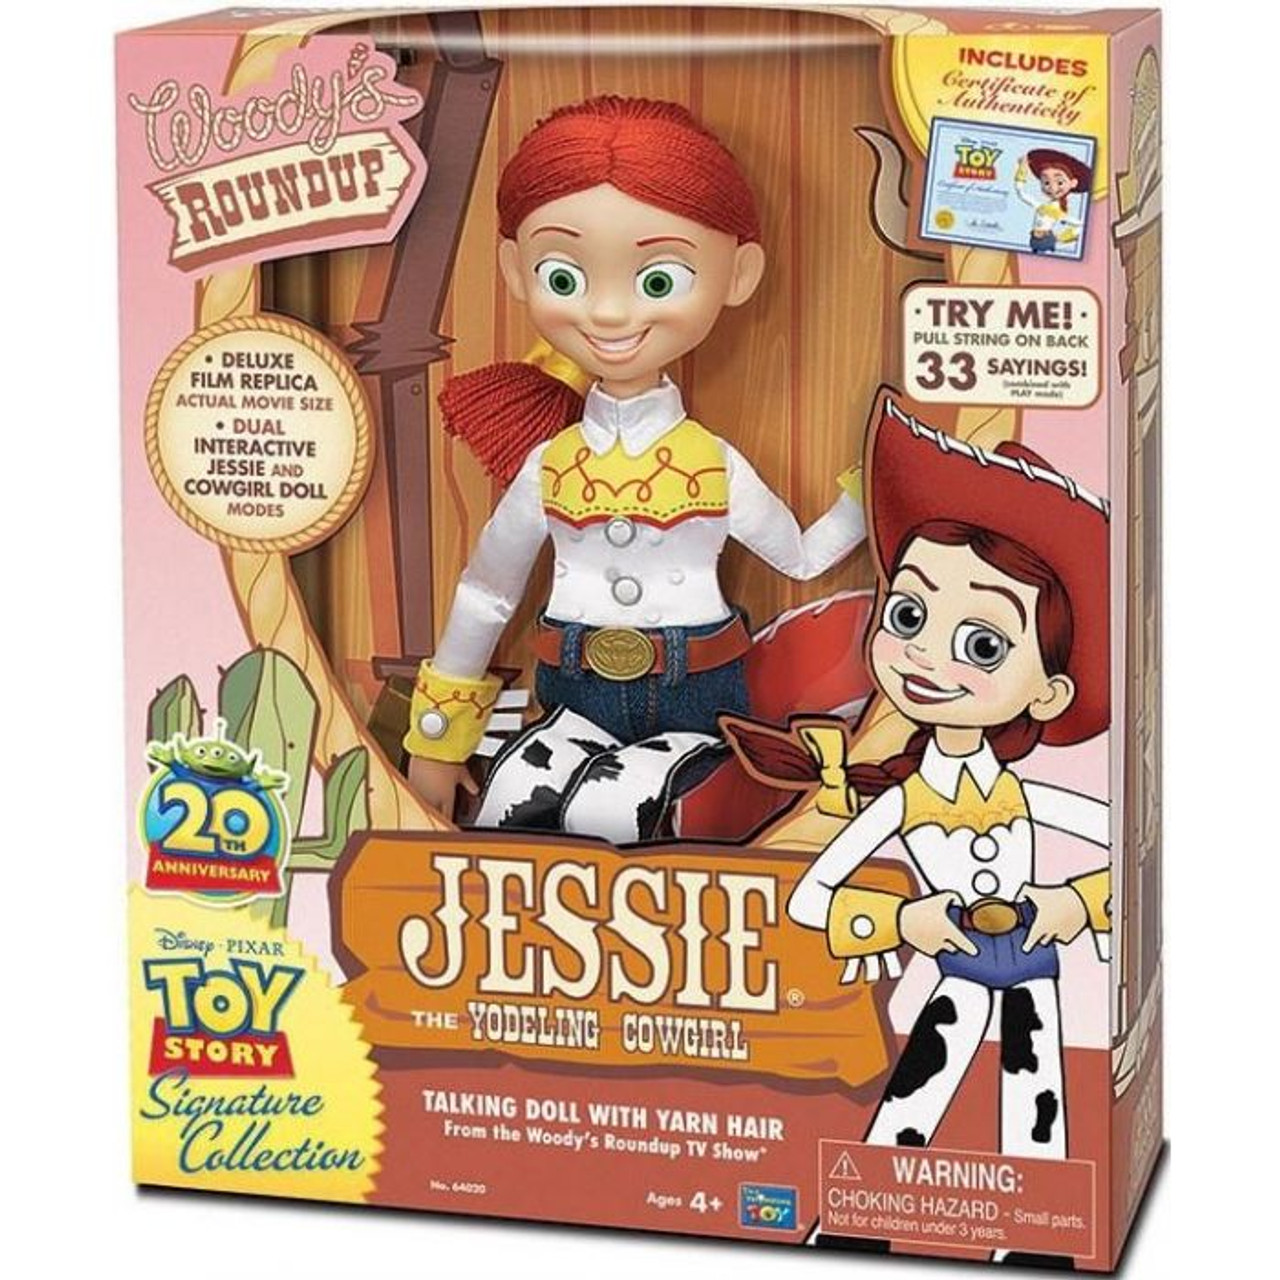 Toy Story Signature Collection Toy Challenge + Jesse & Woody